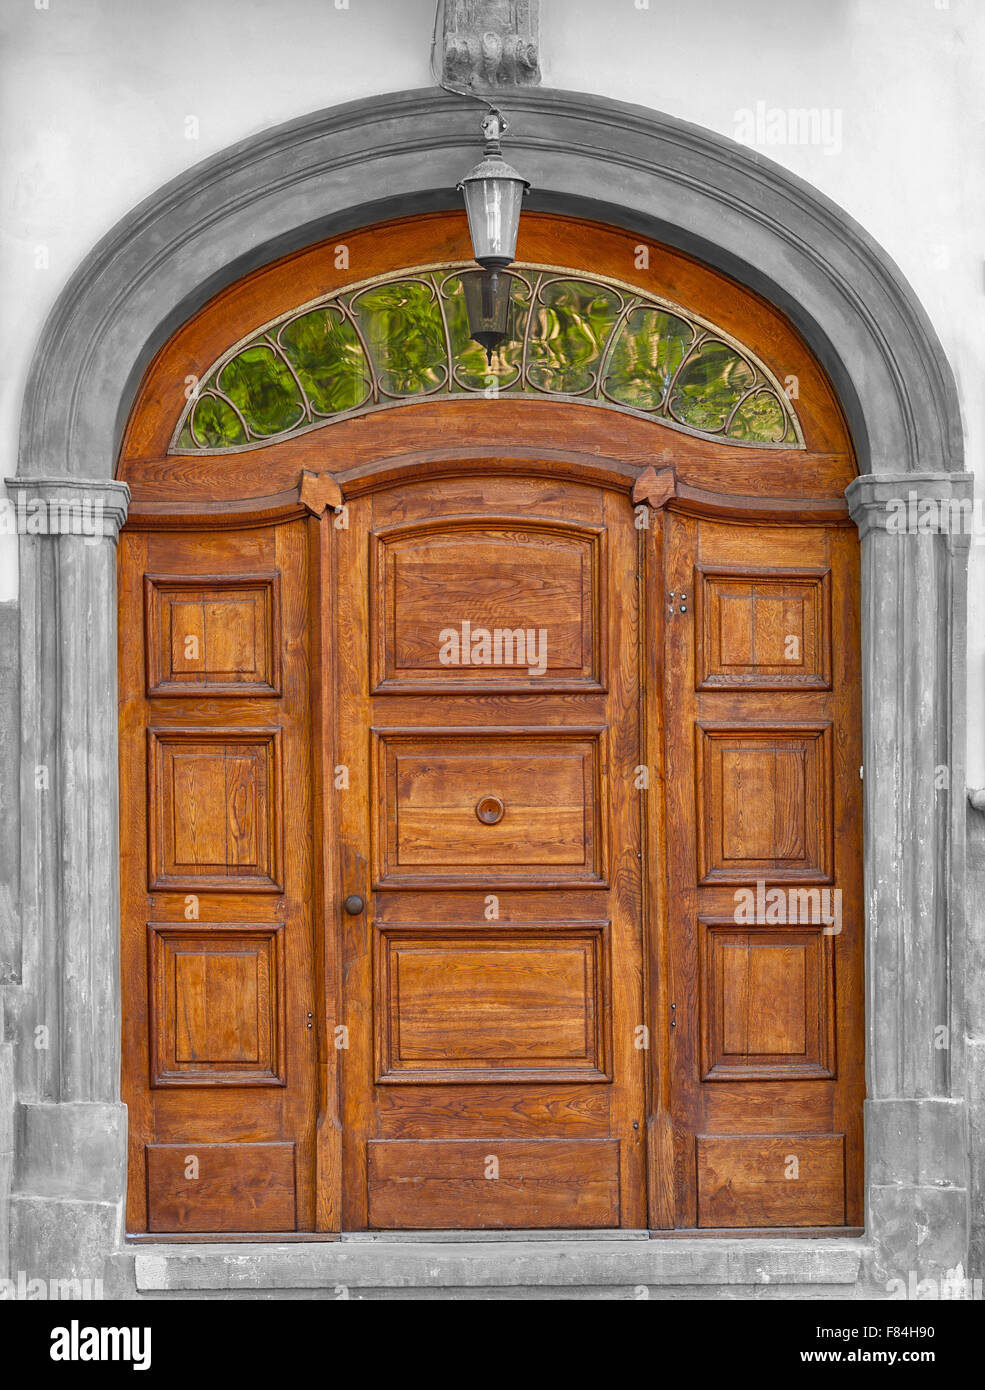 Traditional arched timber door with lead light glass above. Stock Photo